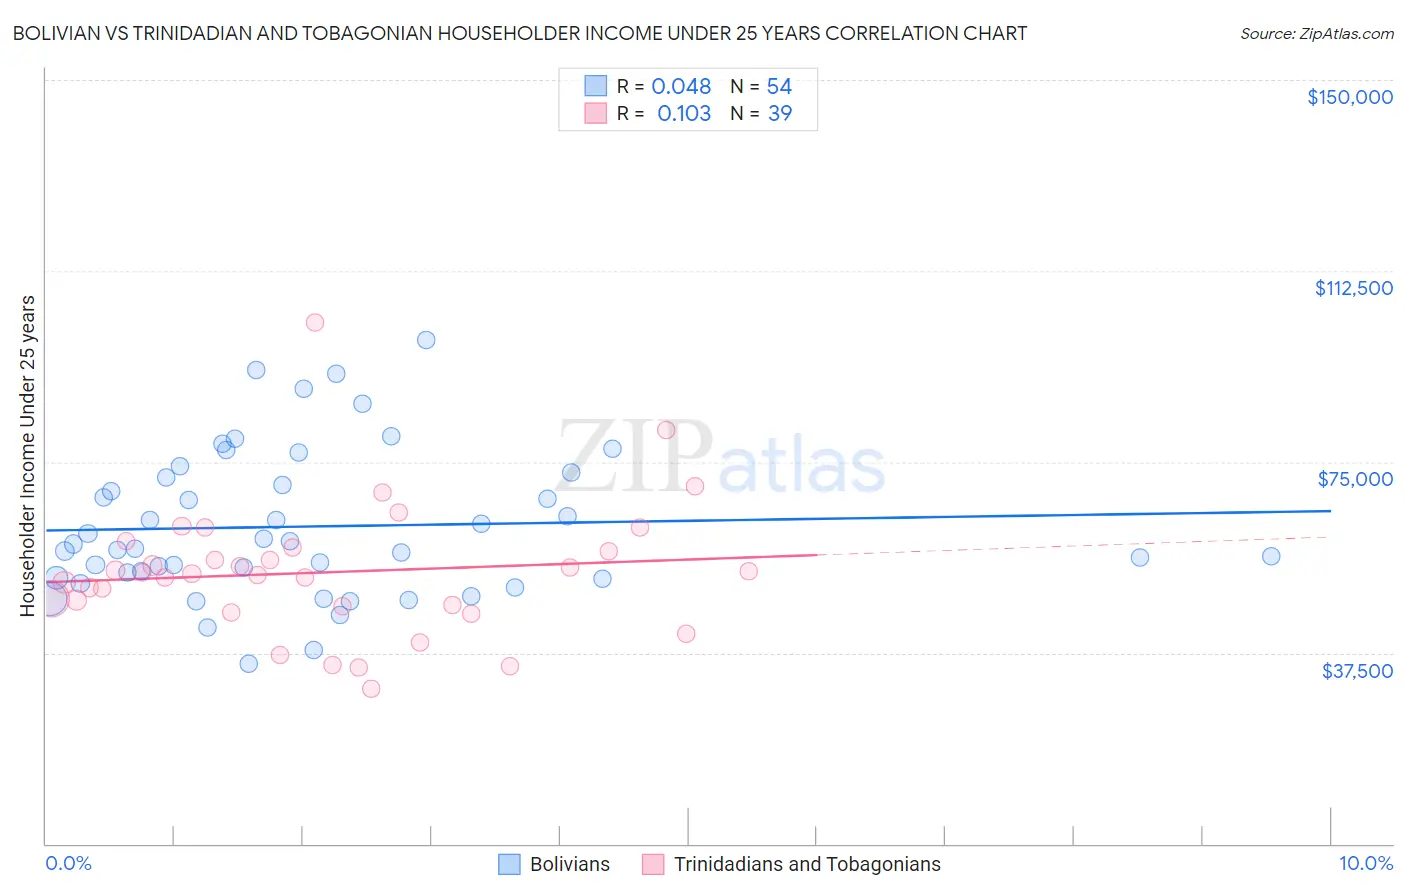 Bolivian vs Trinidadian and Tobagonian Householder Income Under 25 years